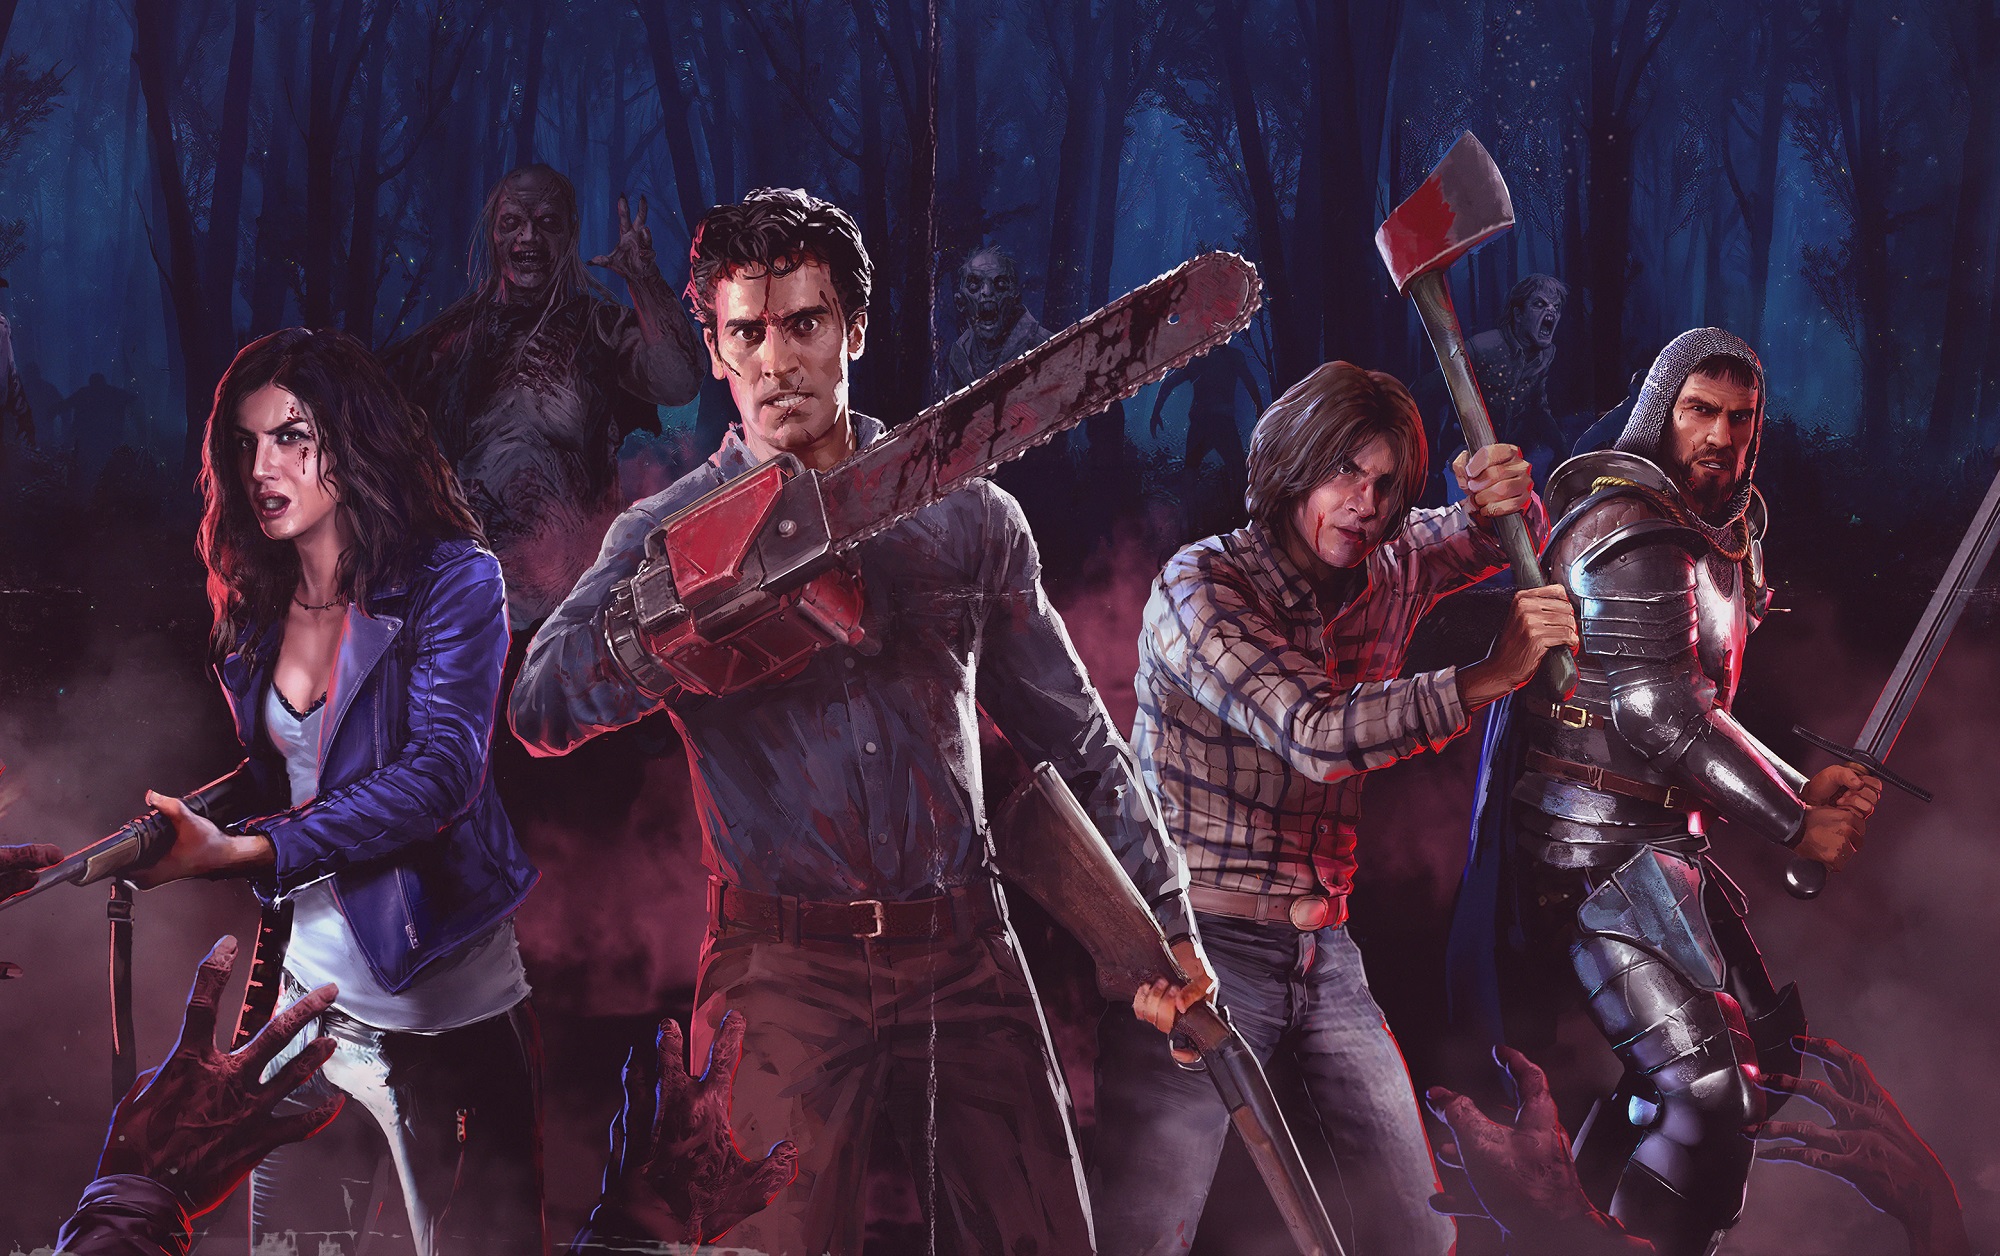 Evil Dead: The Game' leverages its film and TV roots to great